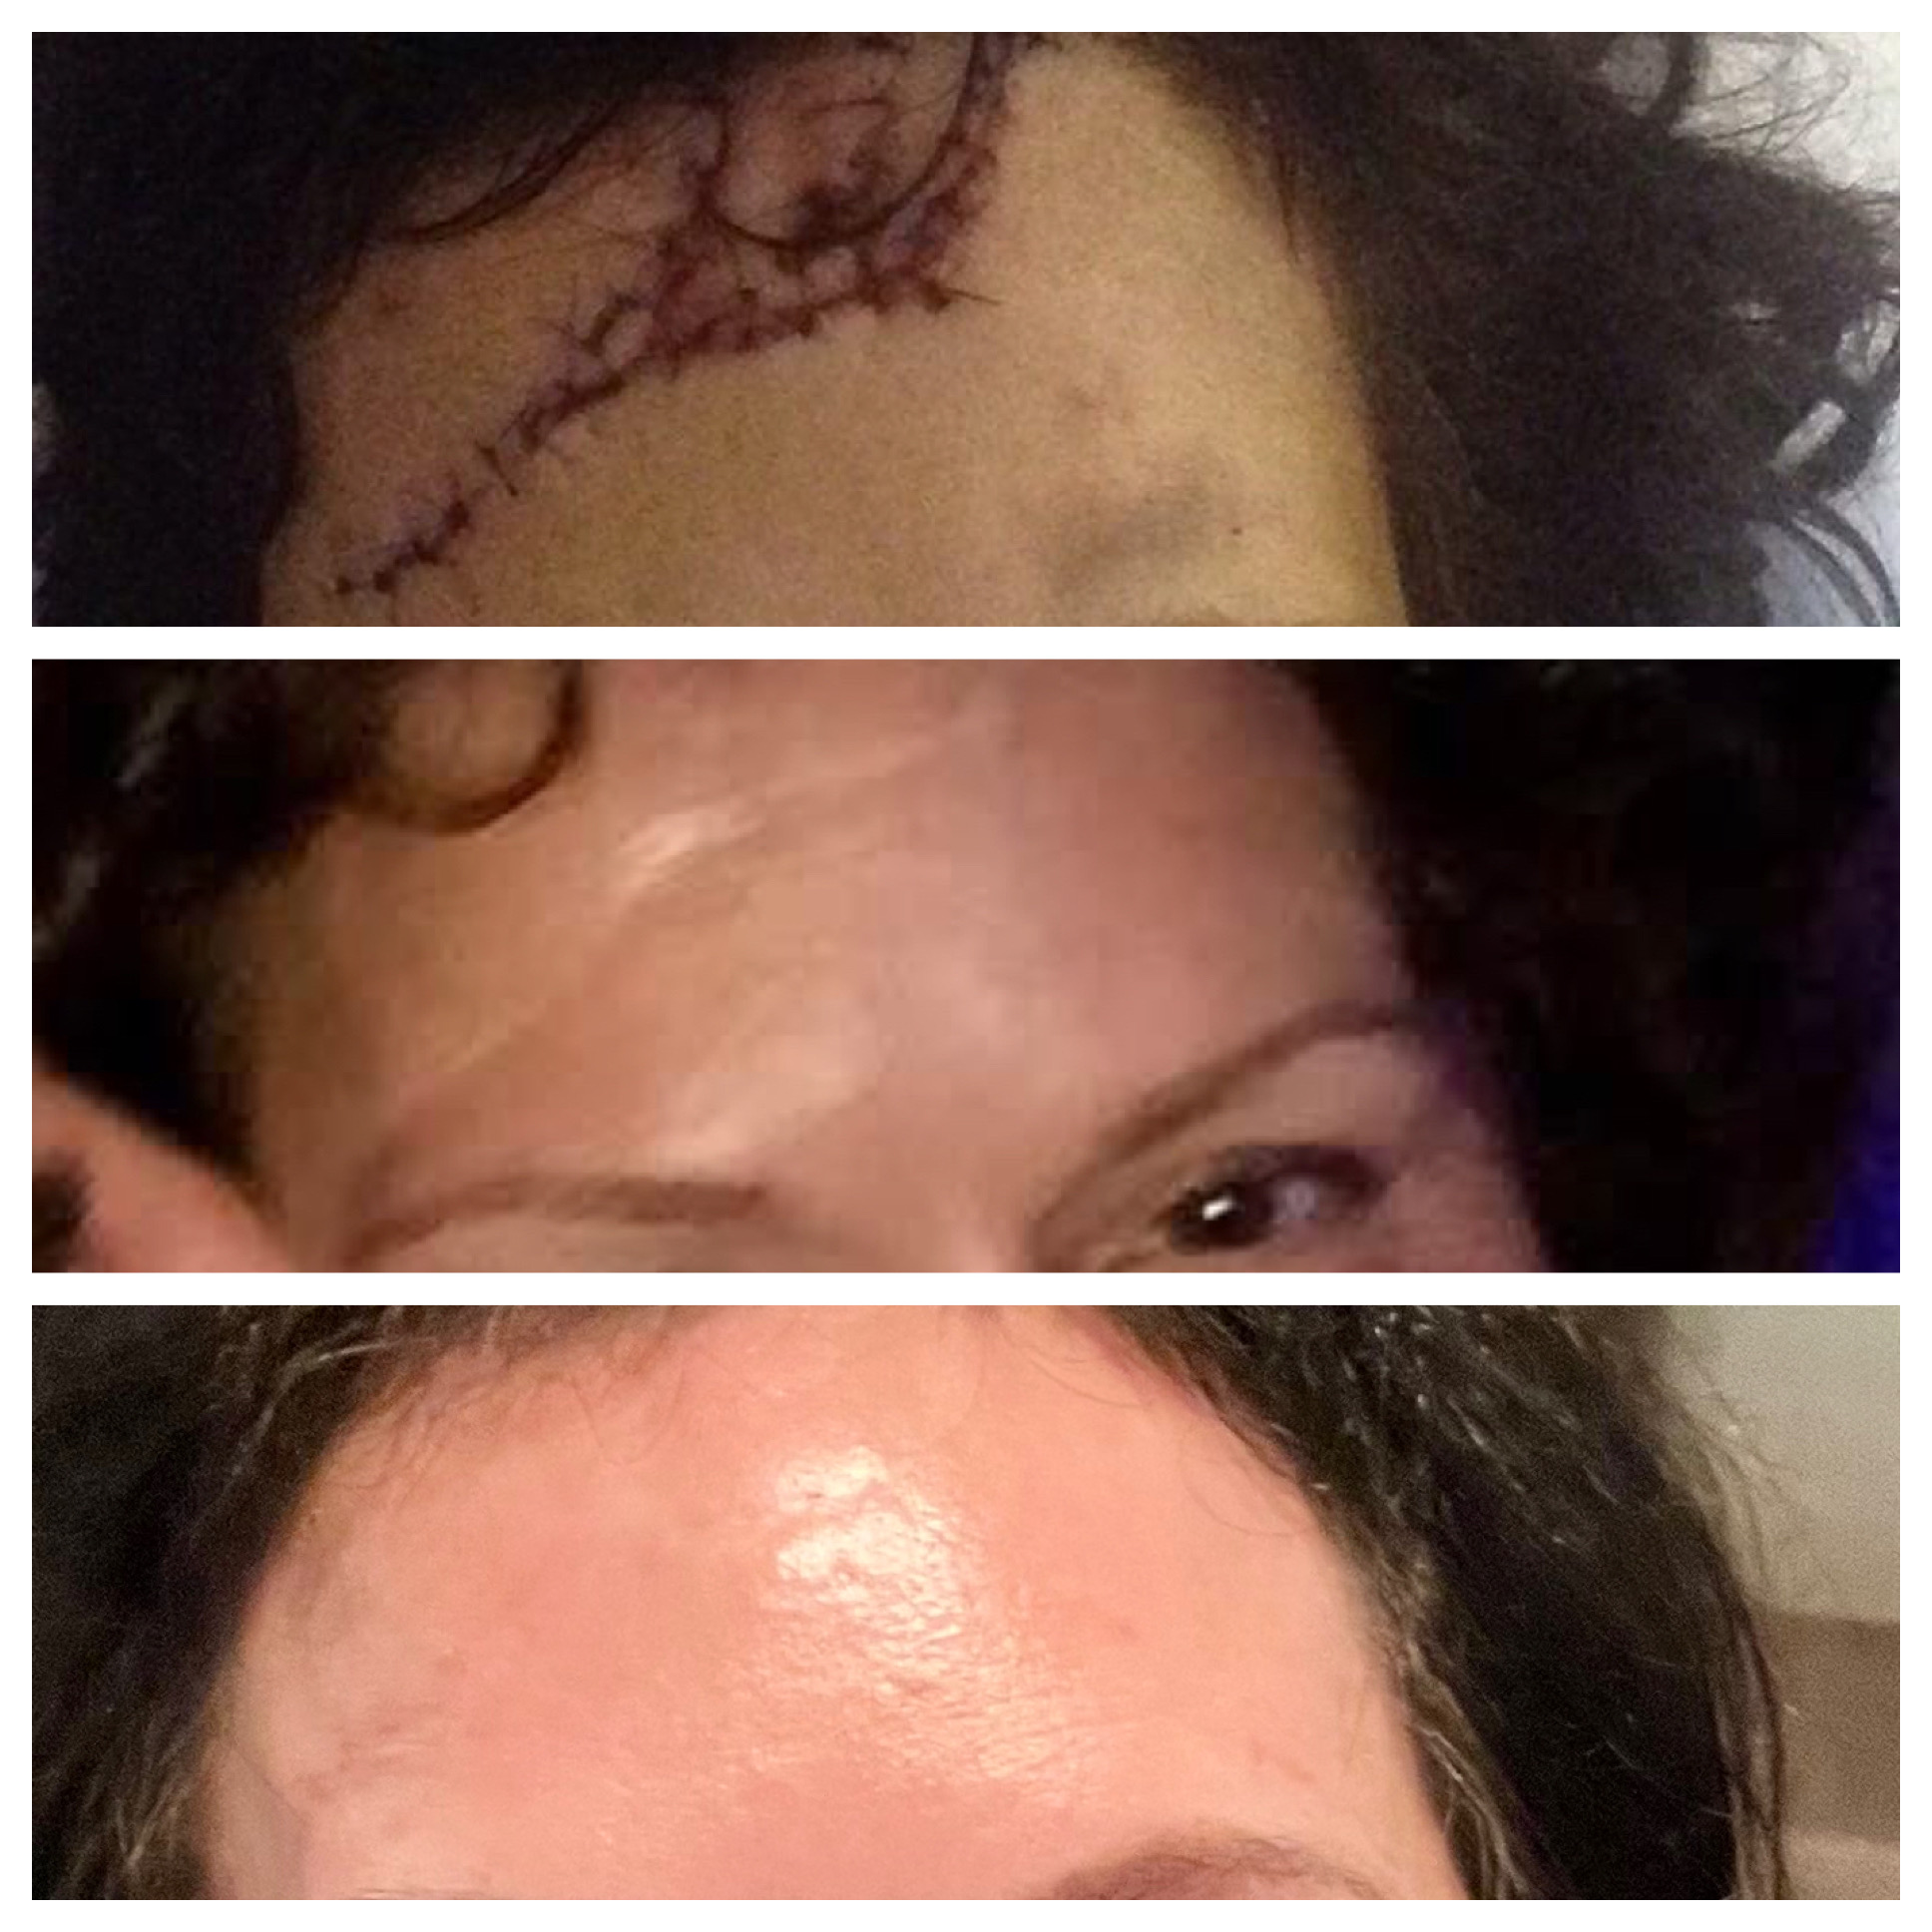 NeoGen Plasma- Scar Revision before & after treatment photos in Leominster, MA | Opulent Aesthetics and Wellness